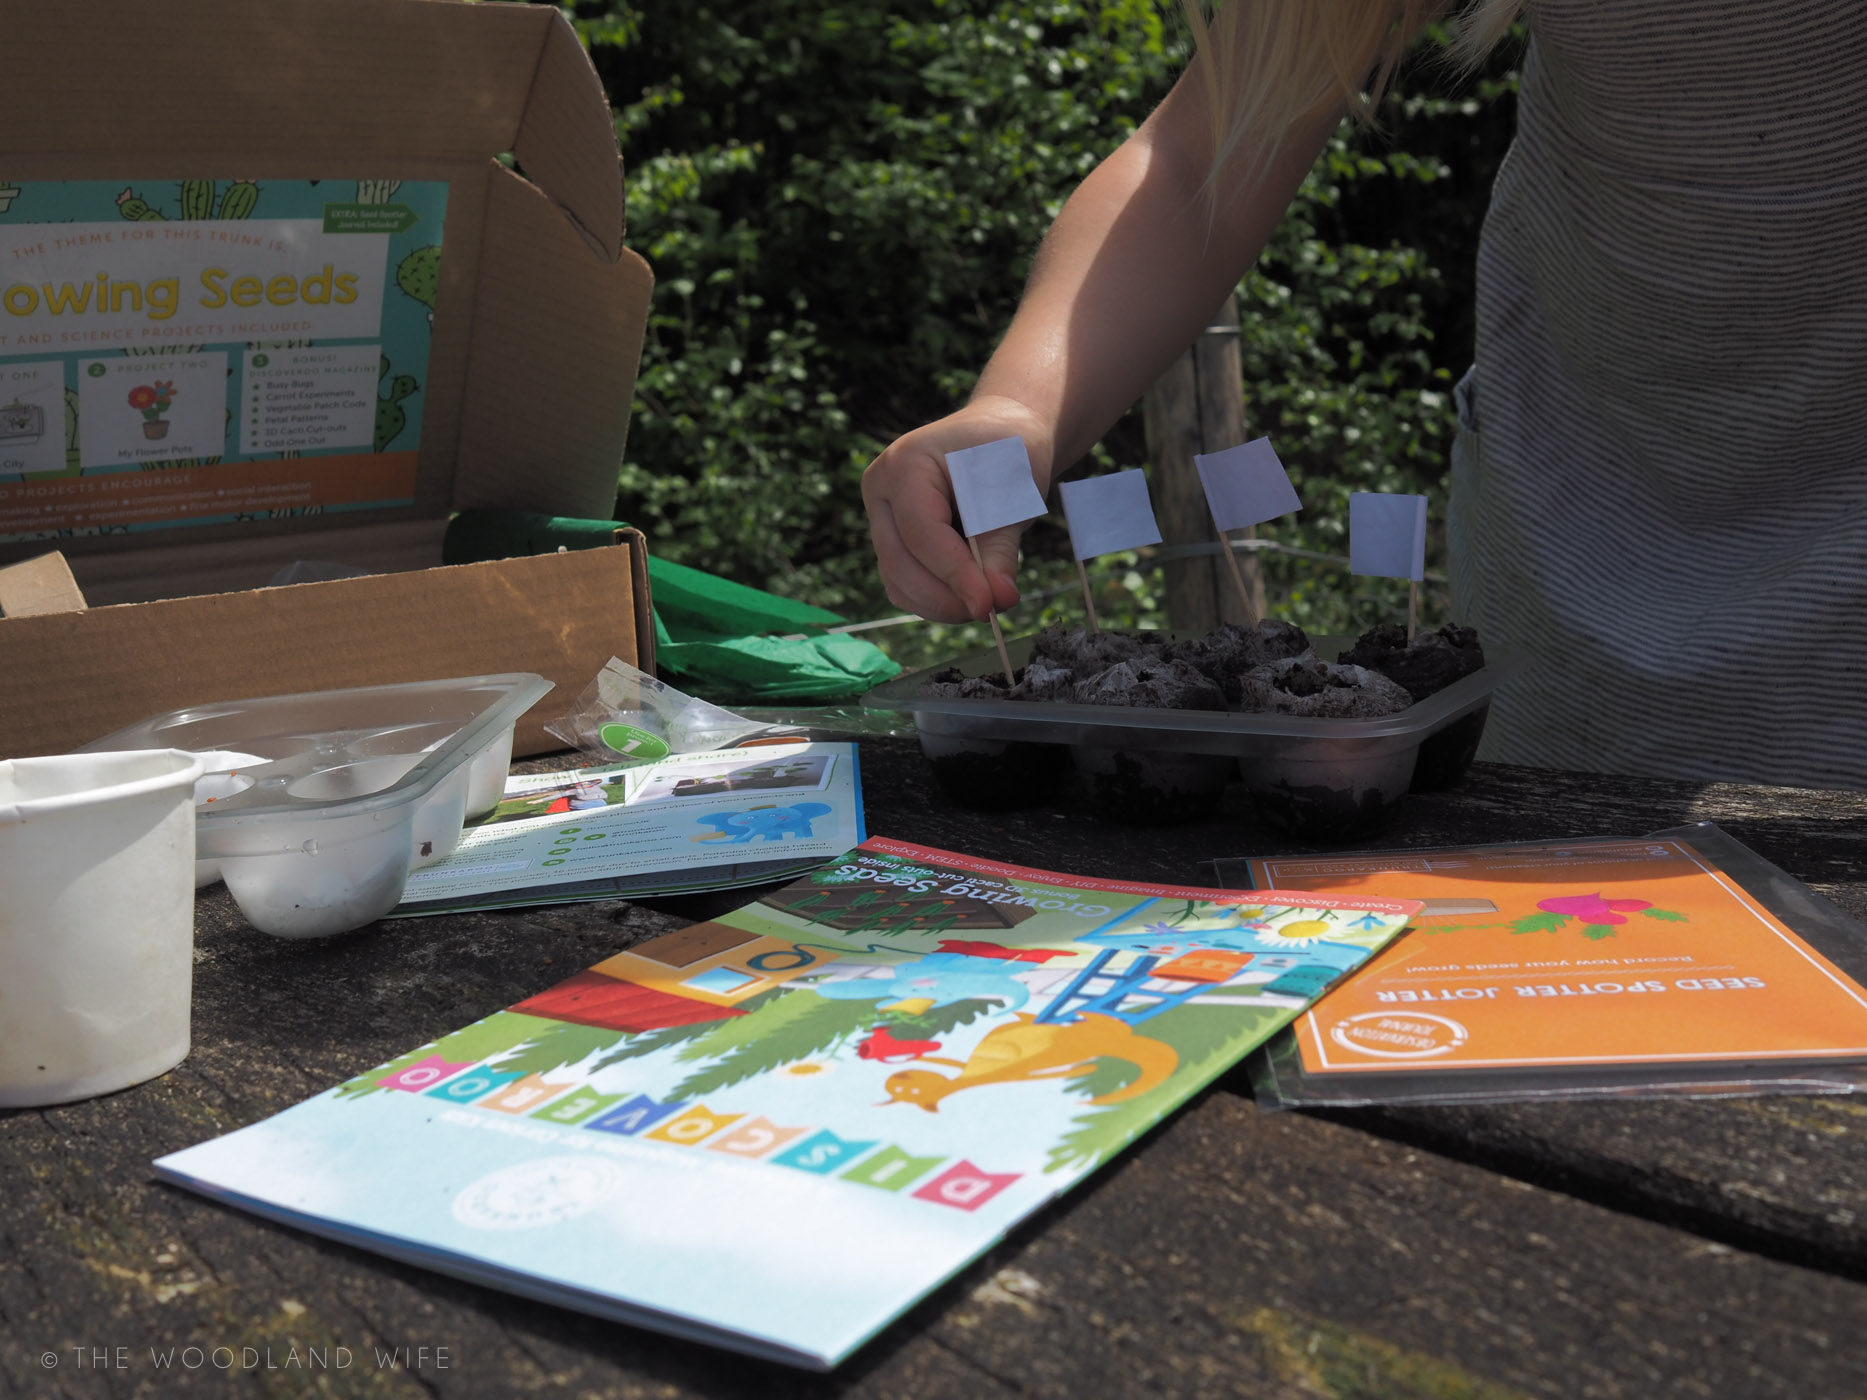 The Woodland Wife - Creative, hassle free Half Term activities at home - Trunkaroo Subscription Boxes